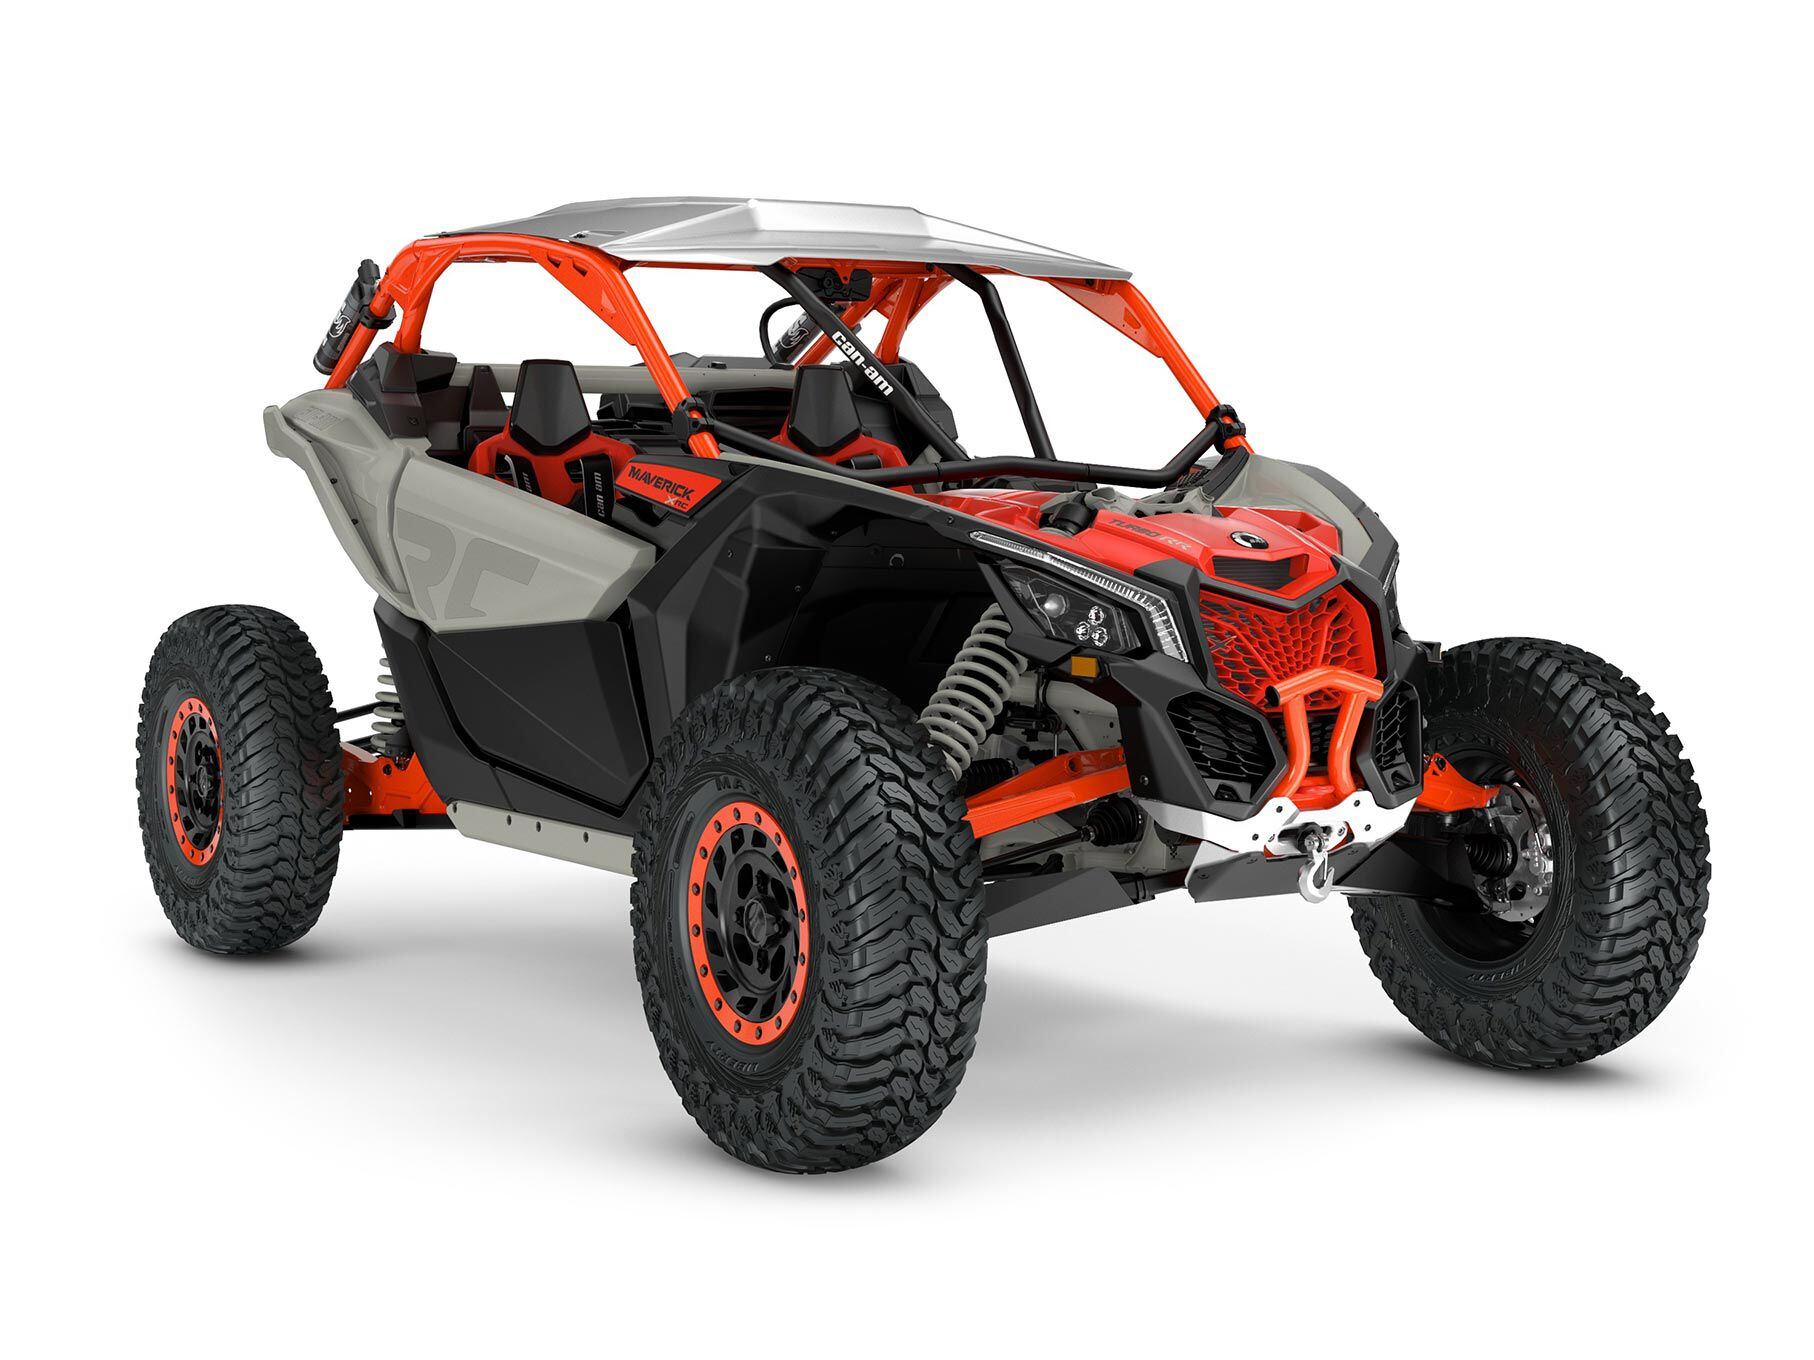 2022 Can-Am Maverick X3 X RC Turbo RR 72 front view in Chalk Gray and Magma Red color.